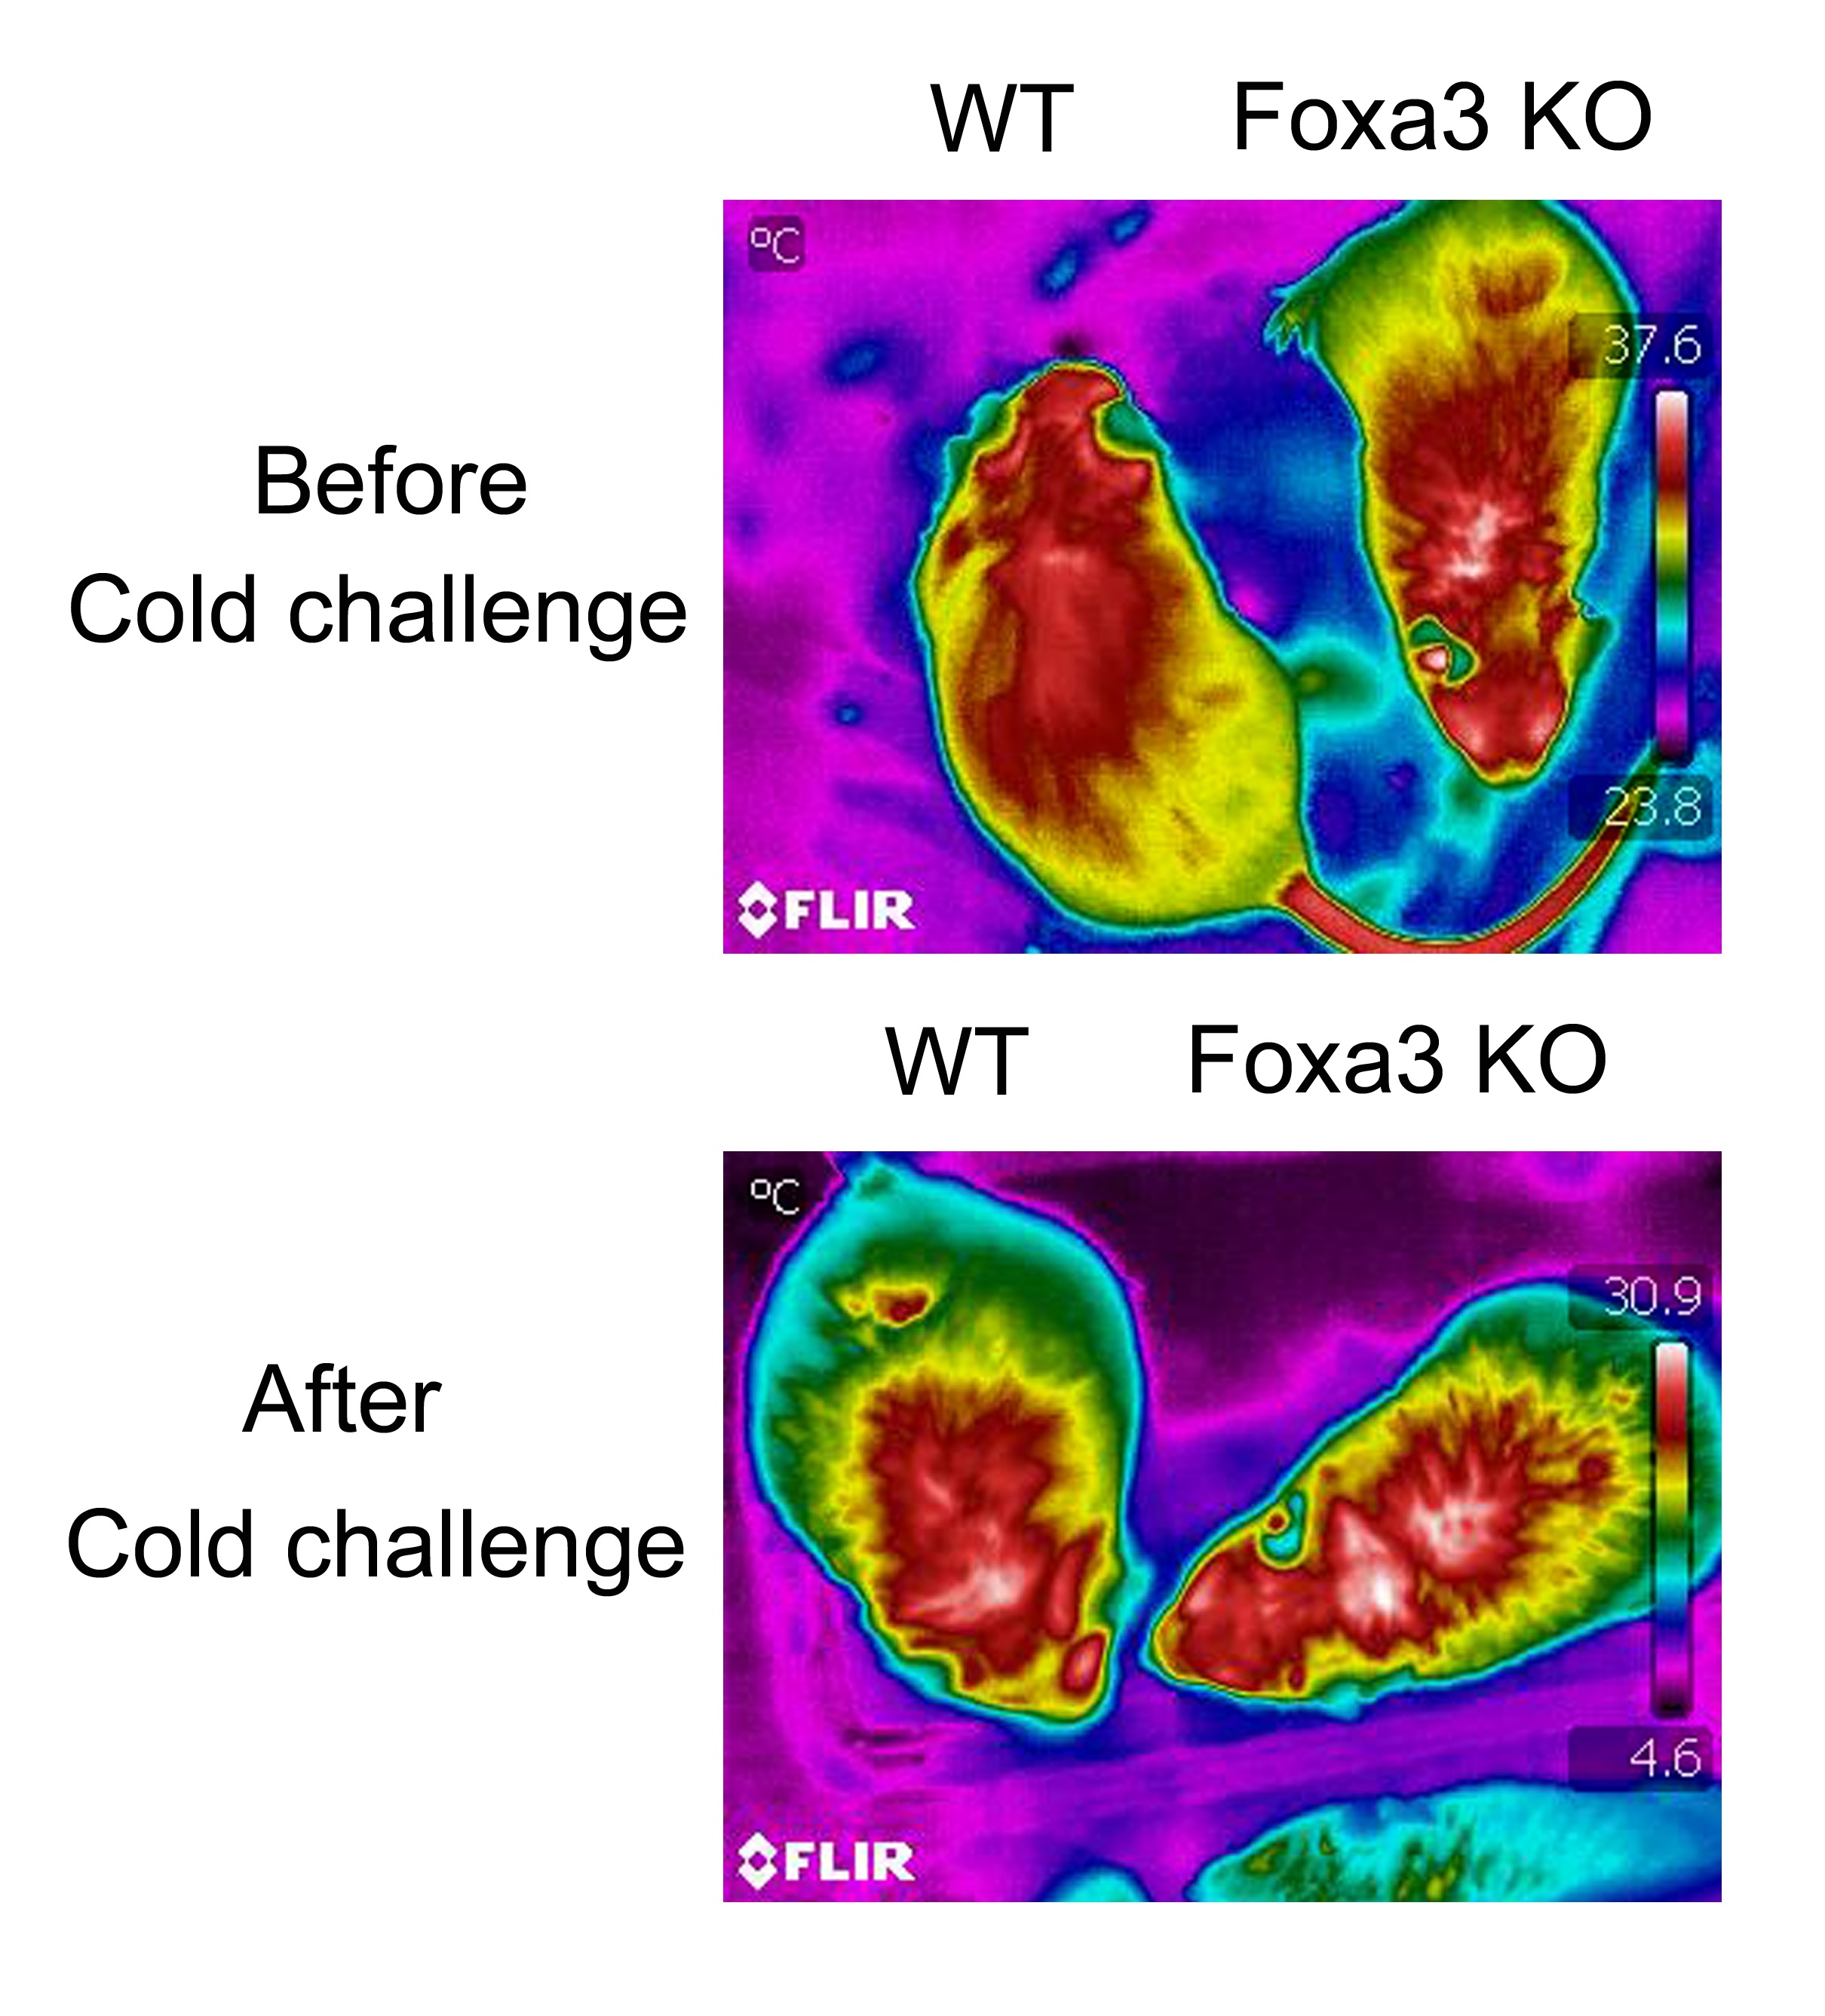 Removing Foxa3 prevents obesity, extends lifespan in mic